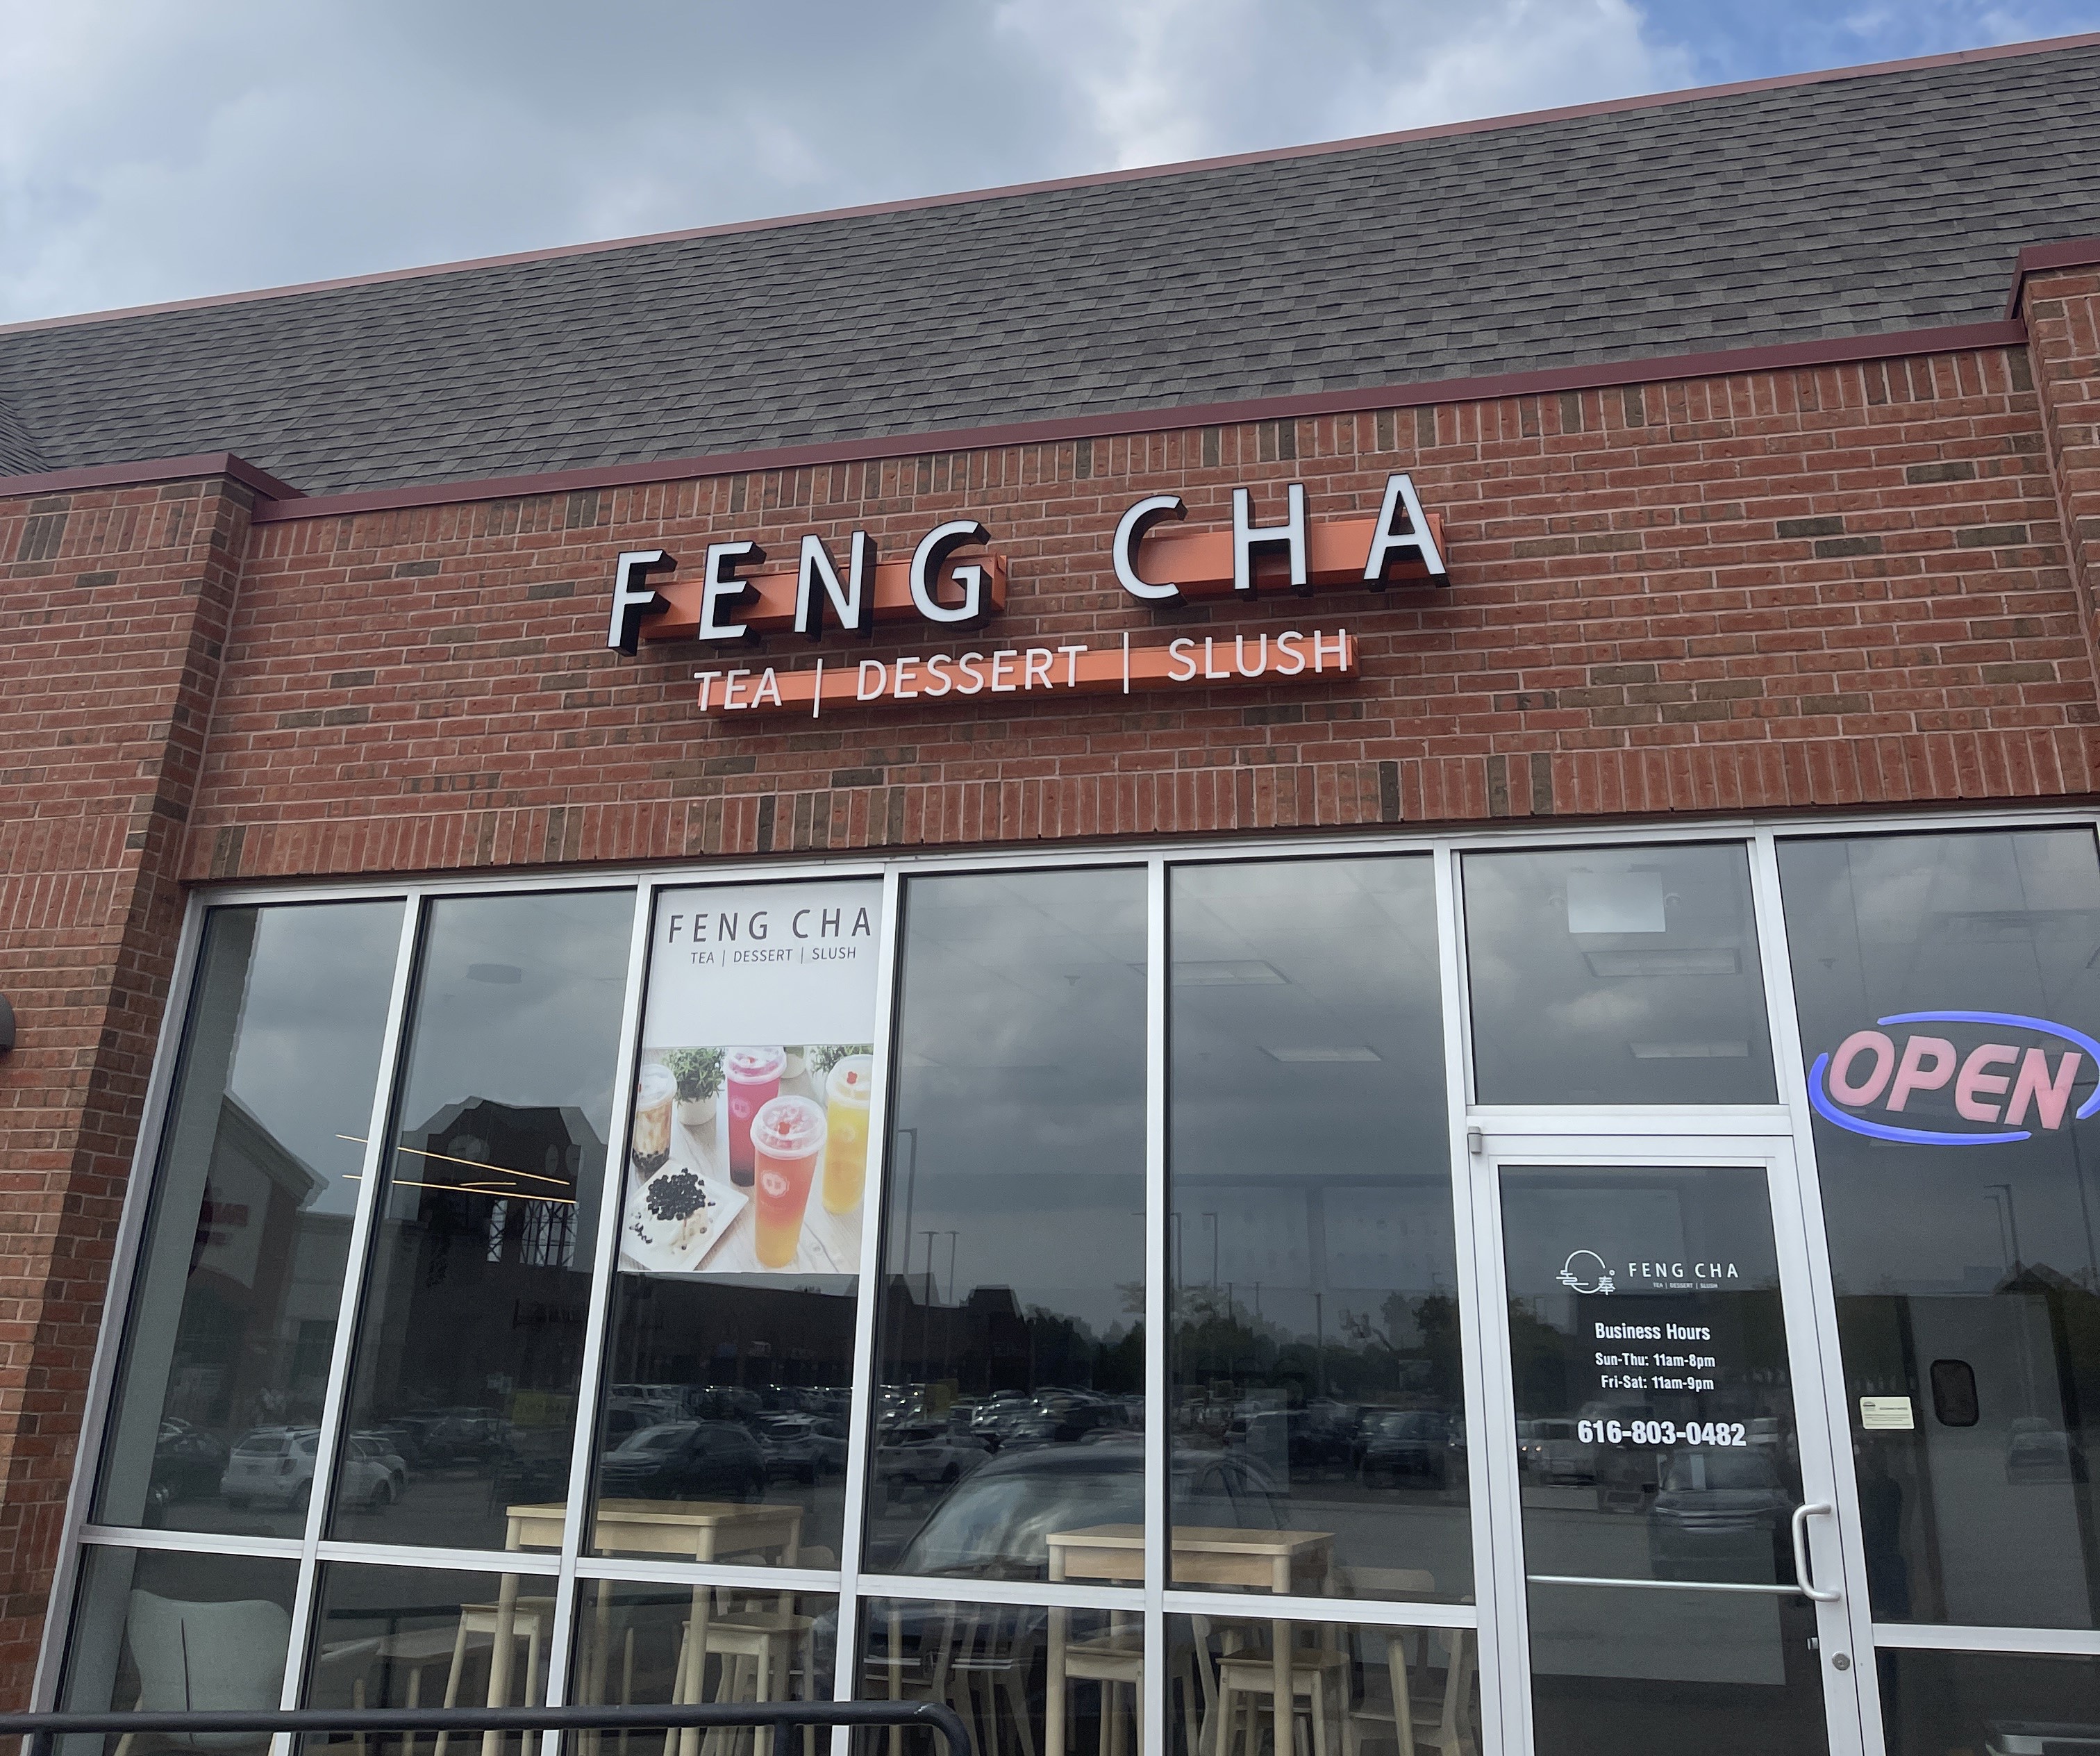 Theon Boba Tea and Cafe Momo House Opens in Grand Rapids